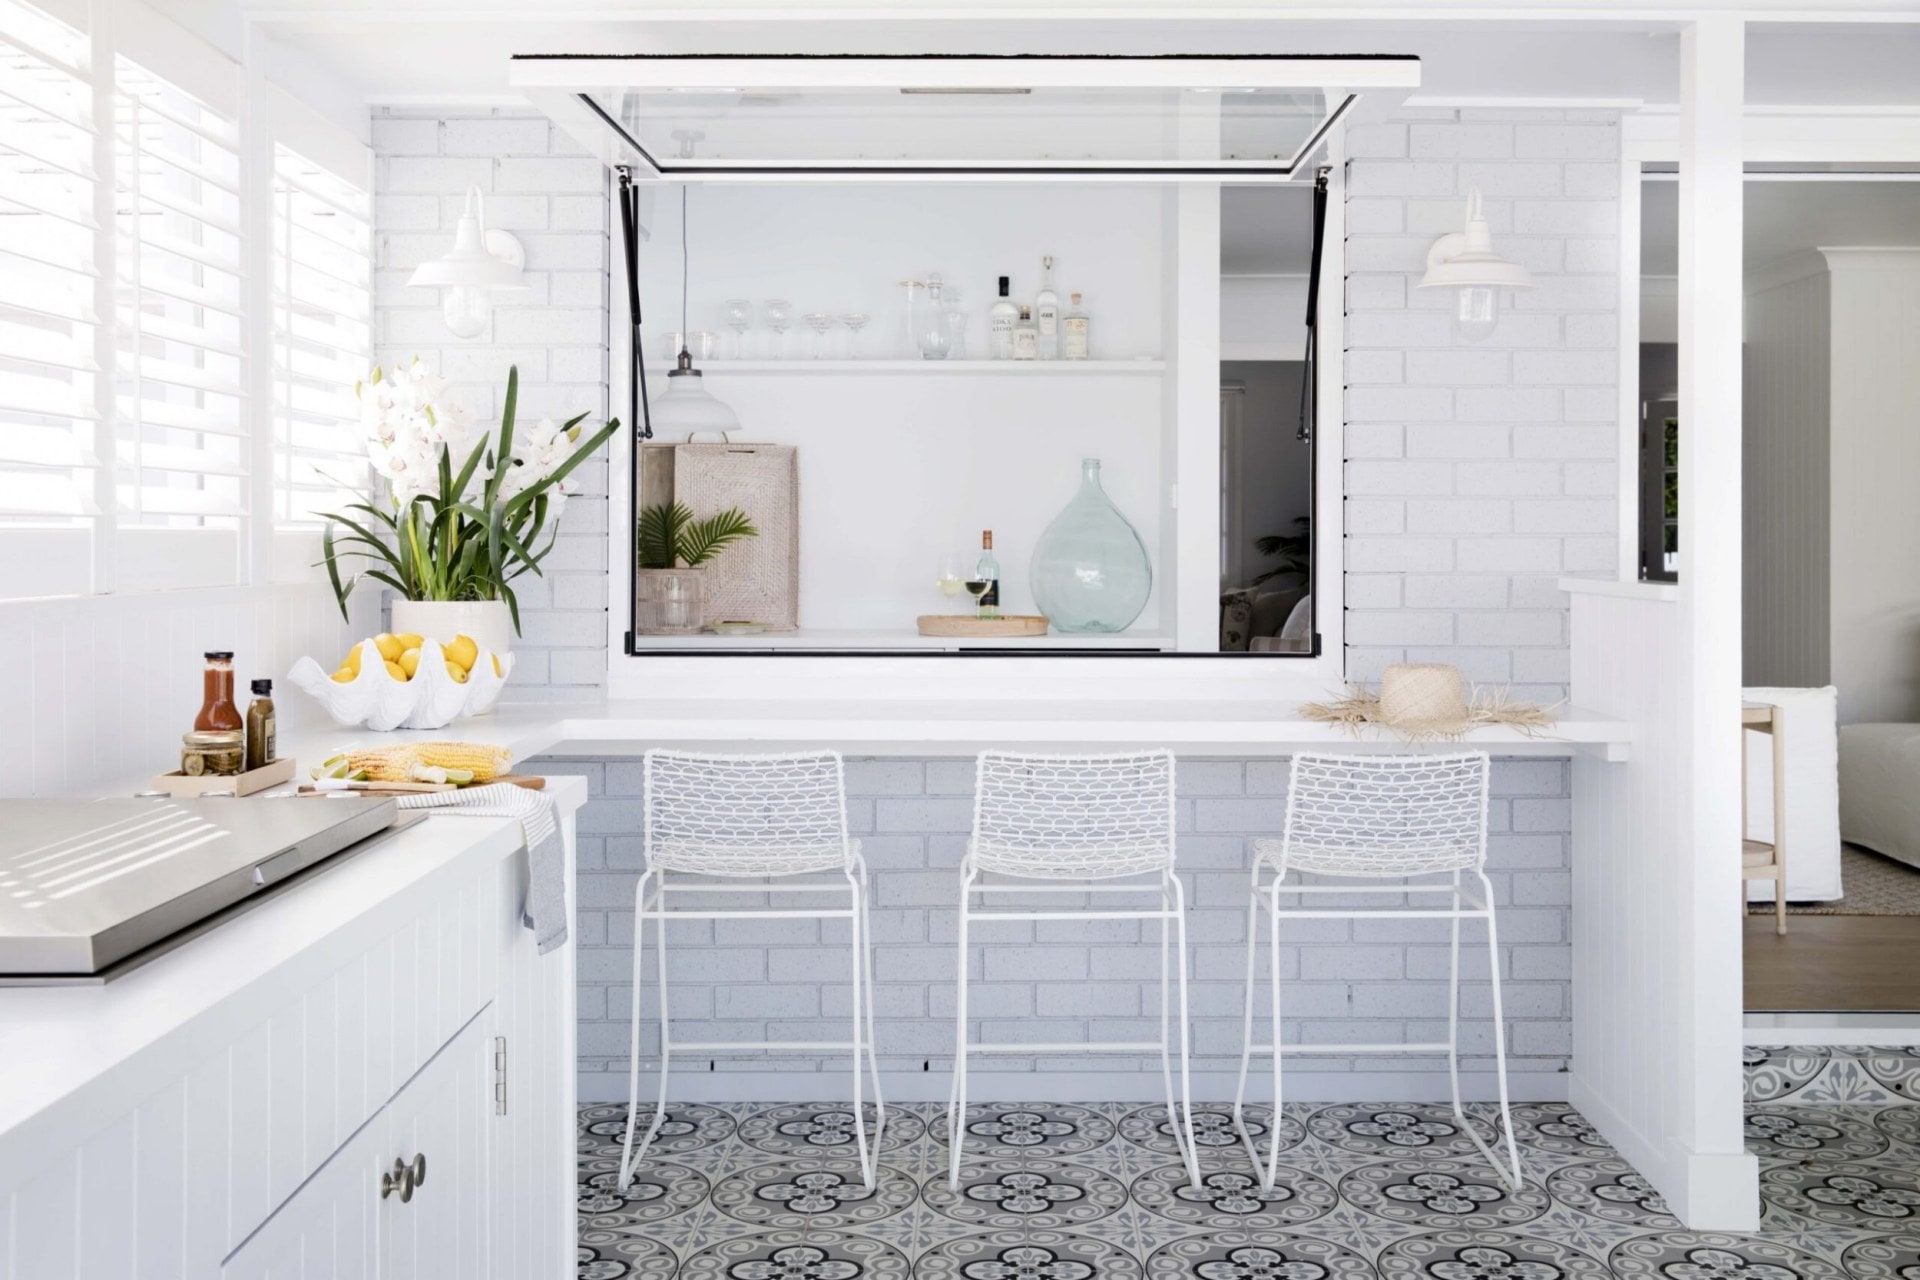 A white outdoor kitchen space with a white benchop and bar stools, a window opens into the kitchen inside